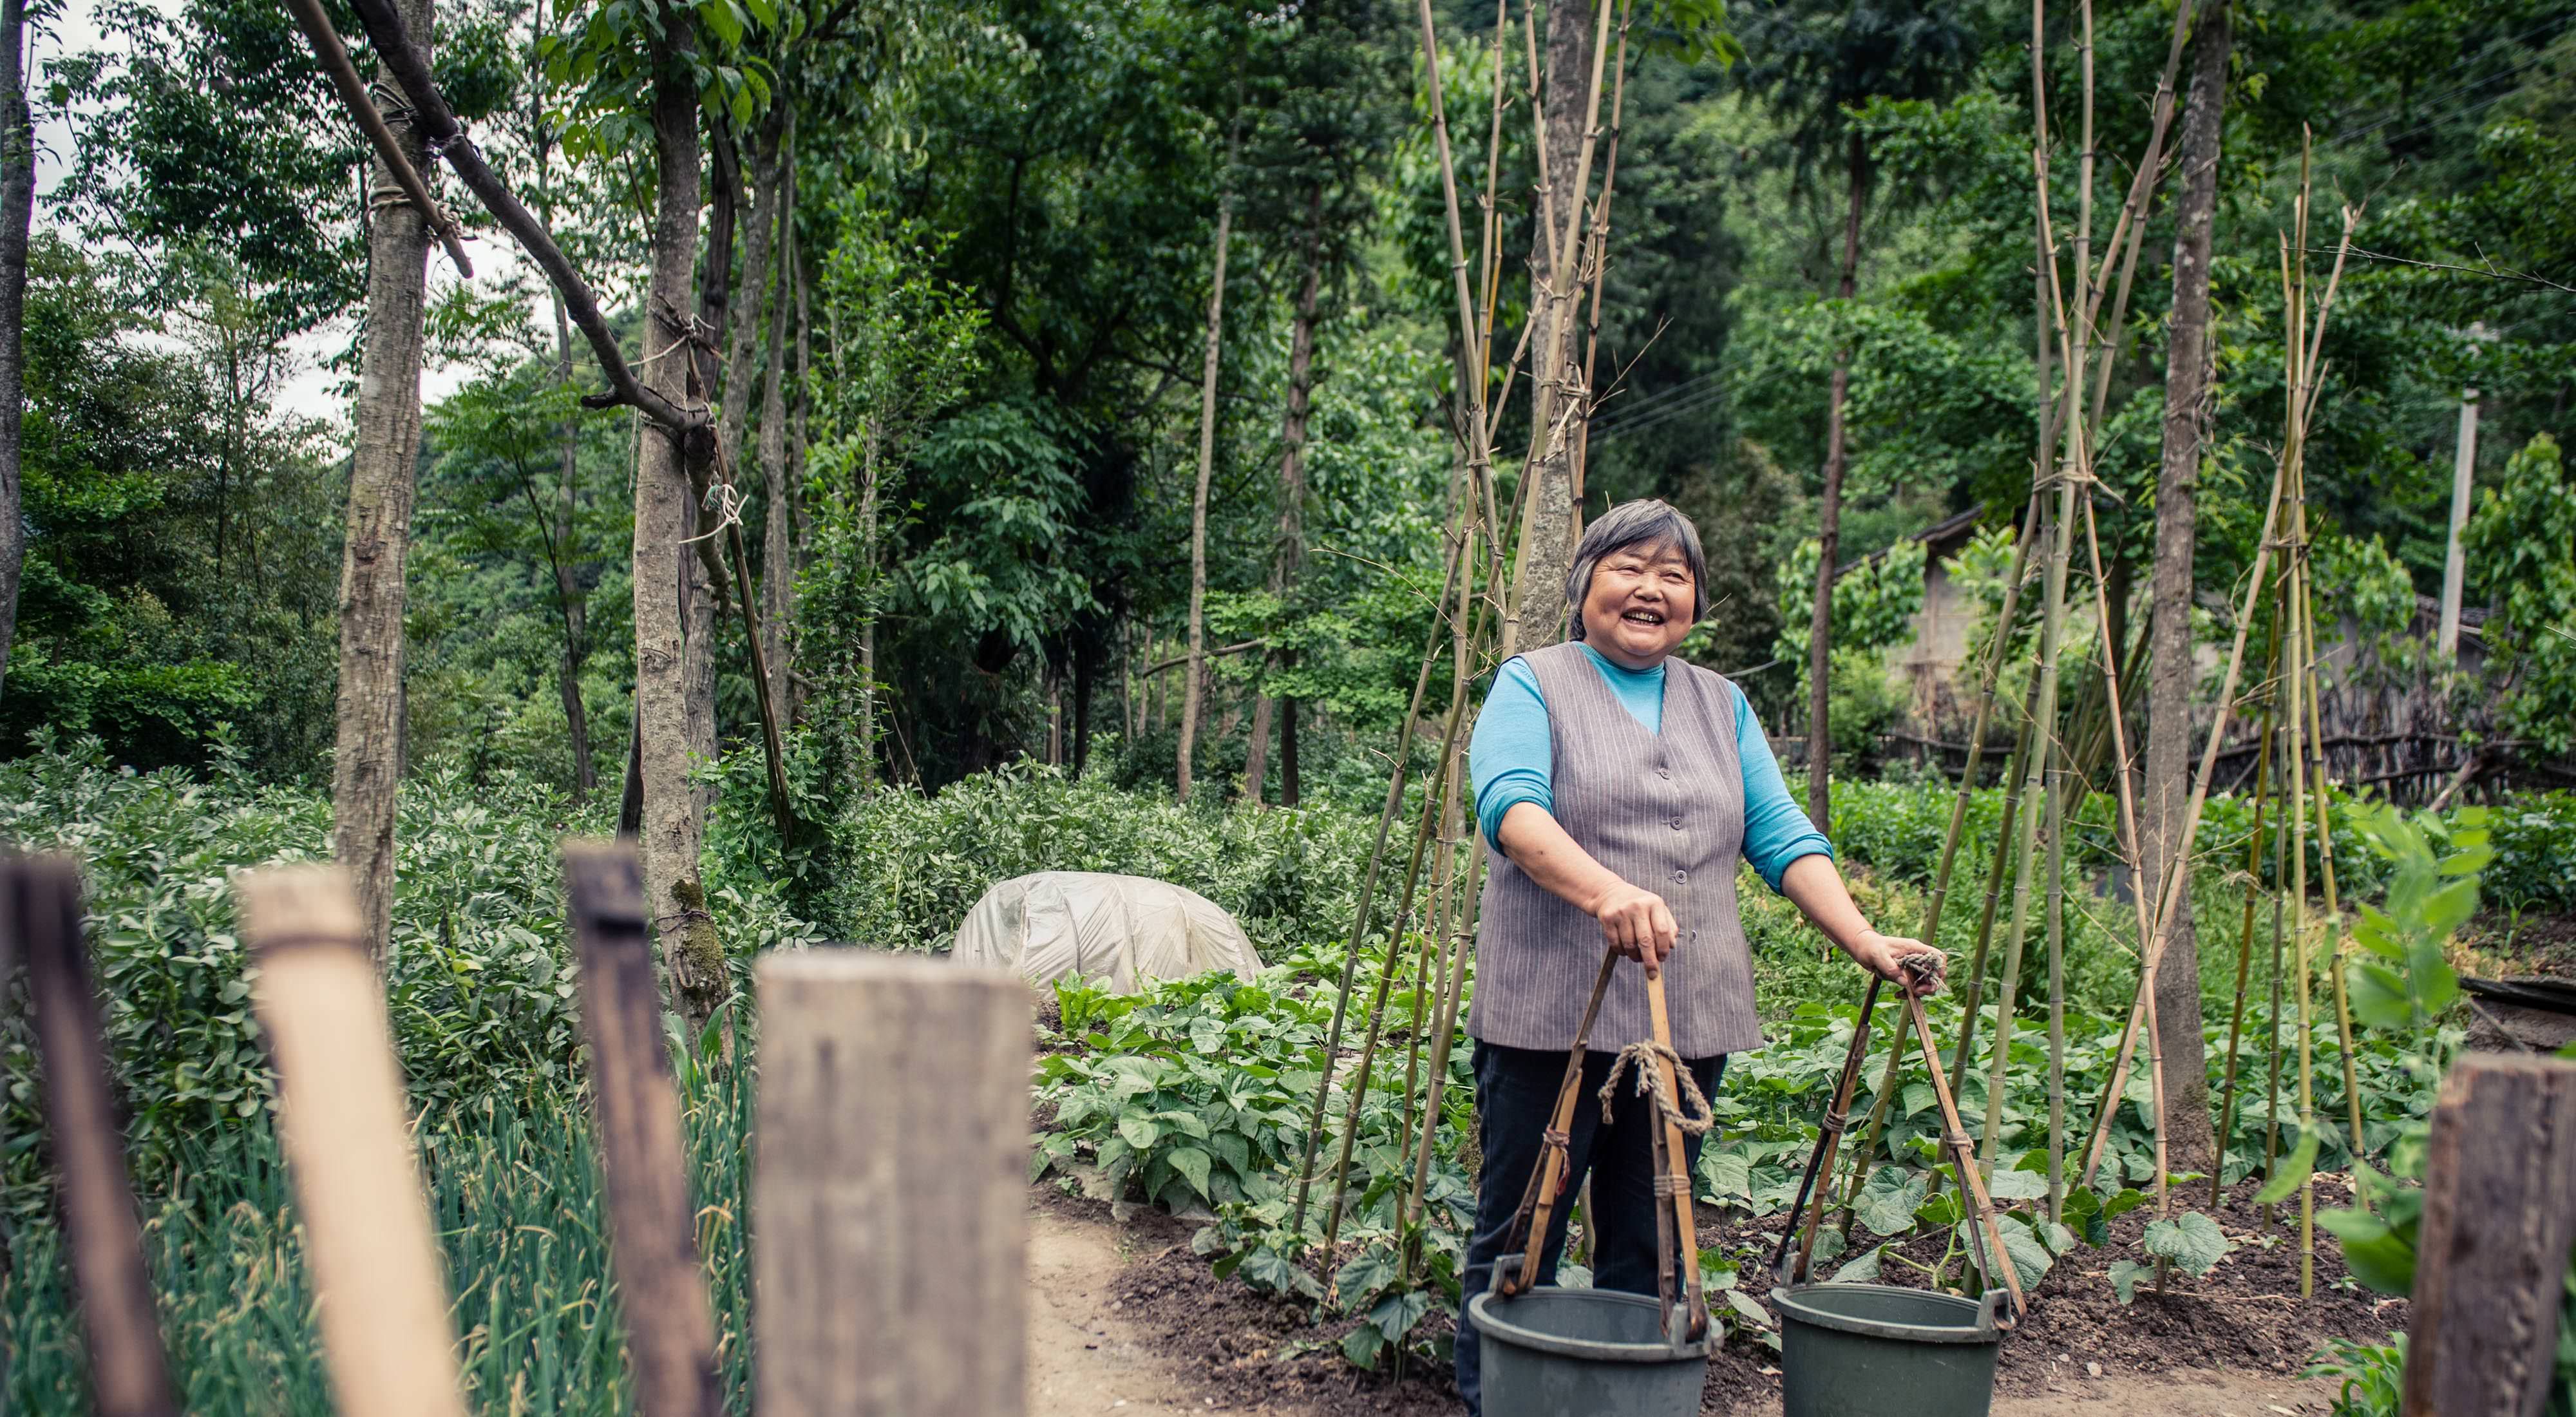 By supporting community development projects like sustainable farming and beekeeping, TNC hopes to villagers around Laohegou will not need to draw on the reserve’s resources.